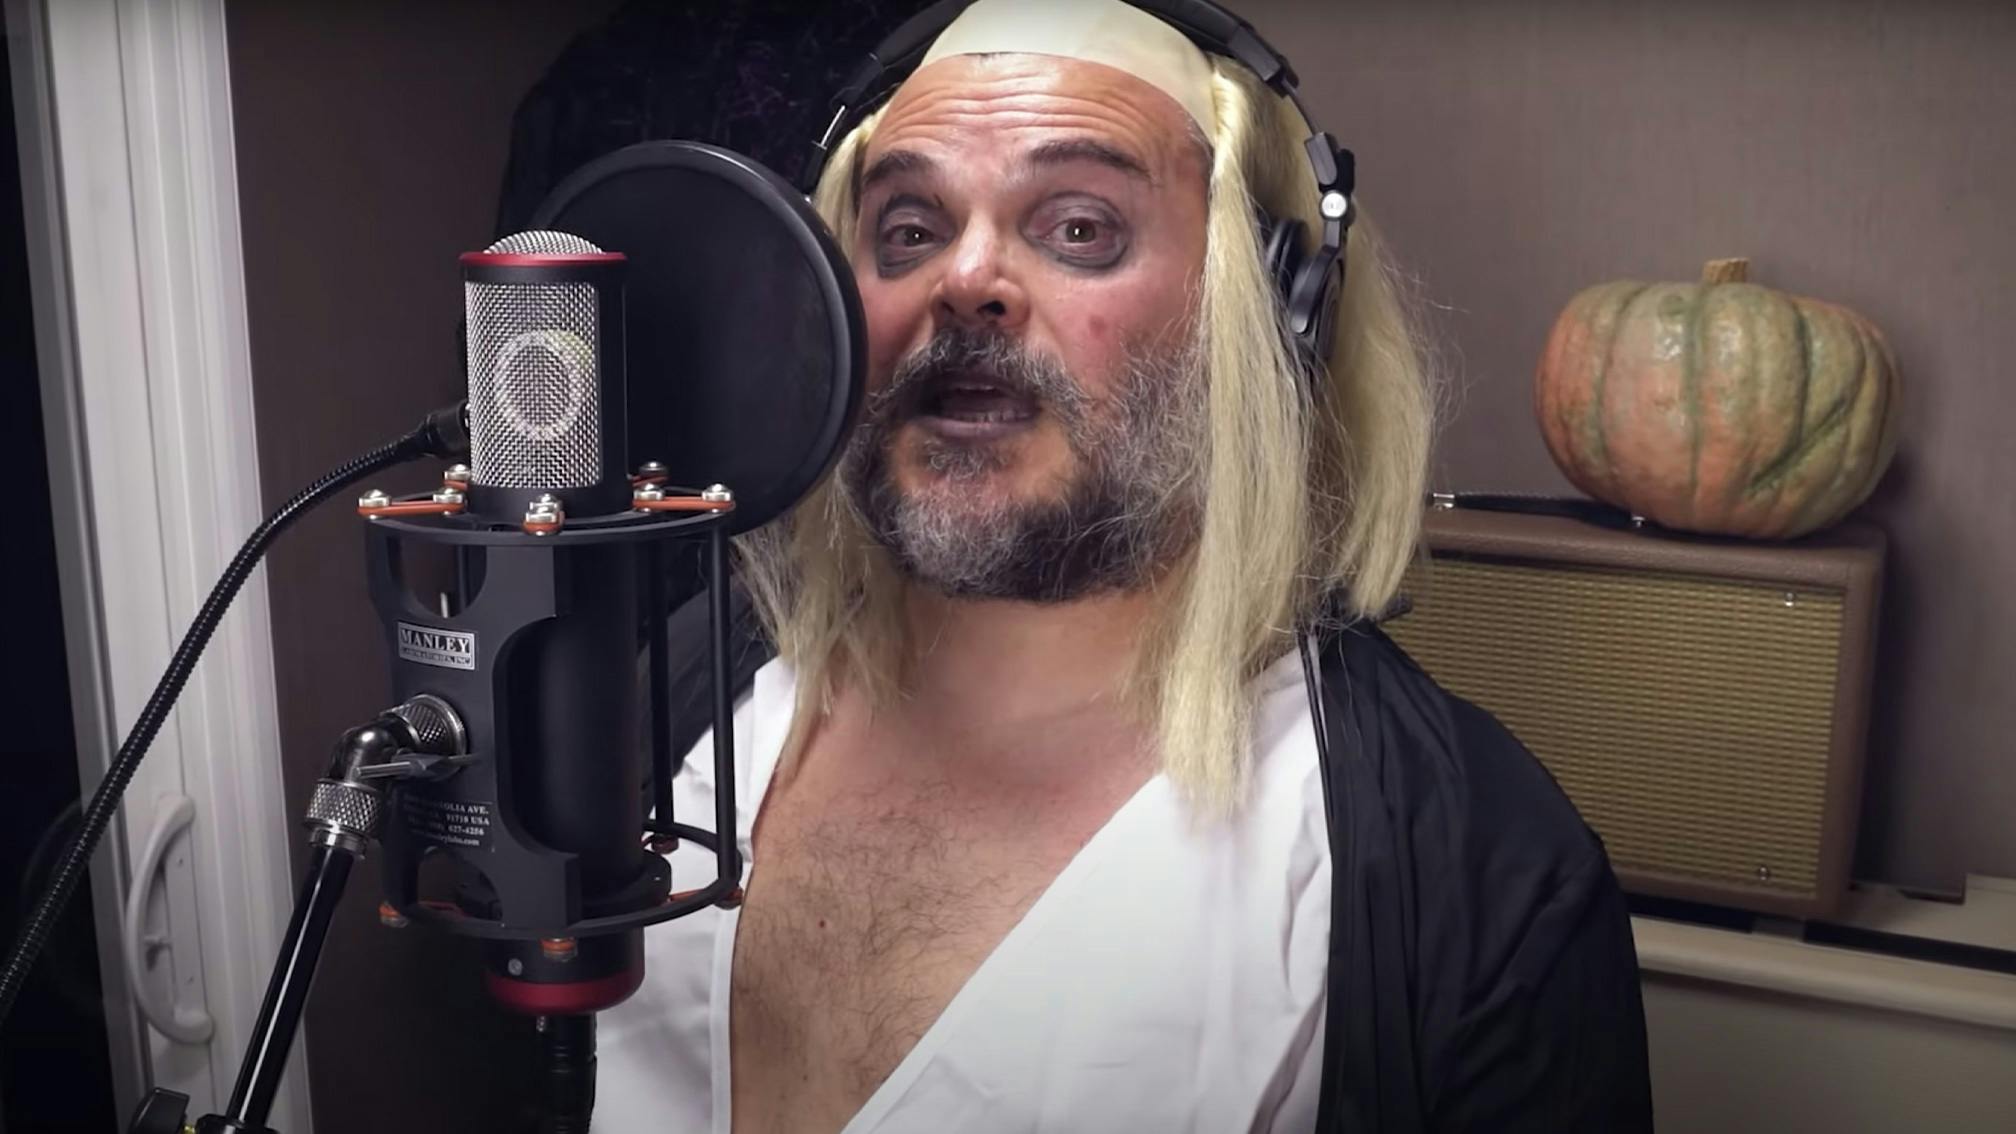 Tenacious D Cover Time Warp While Encouraging Listeners To Vote Left